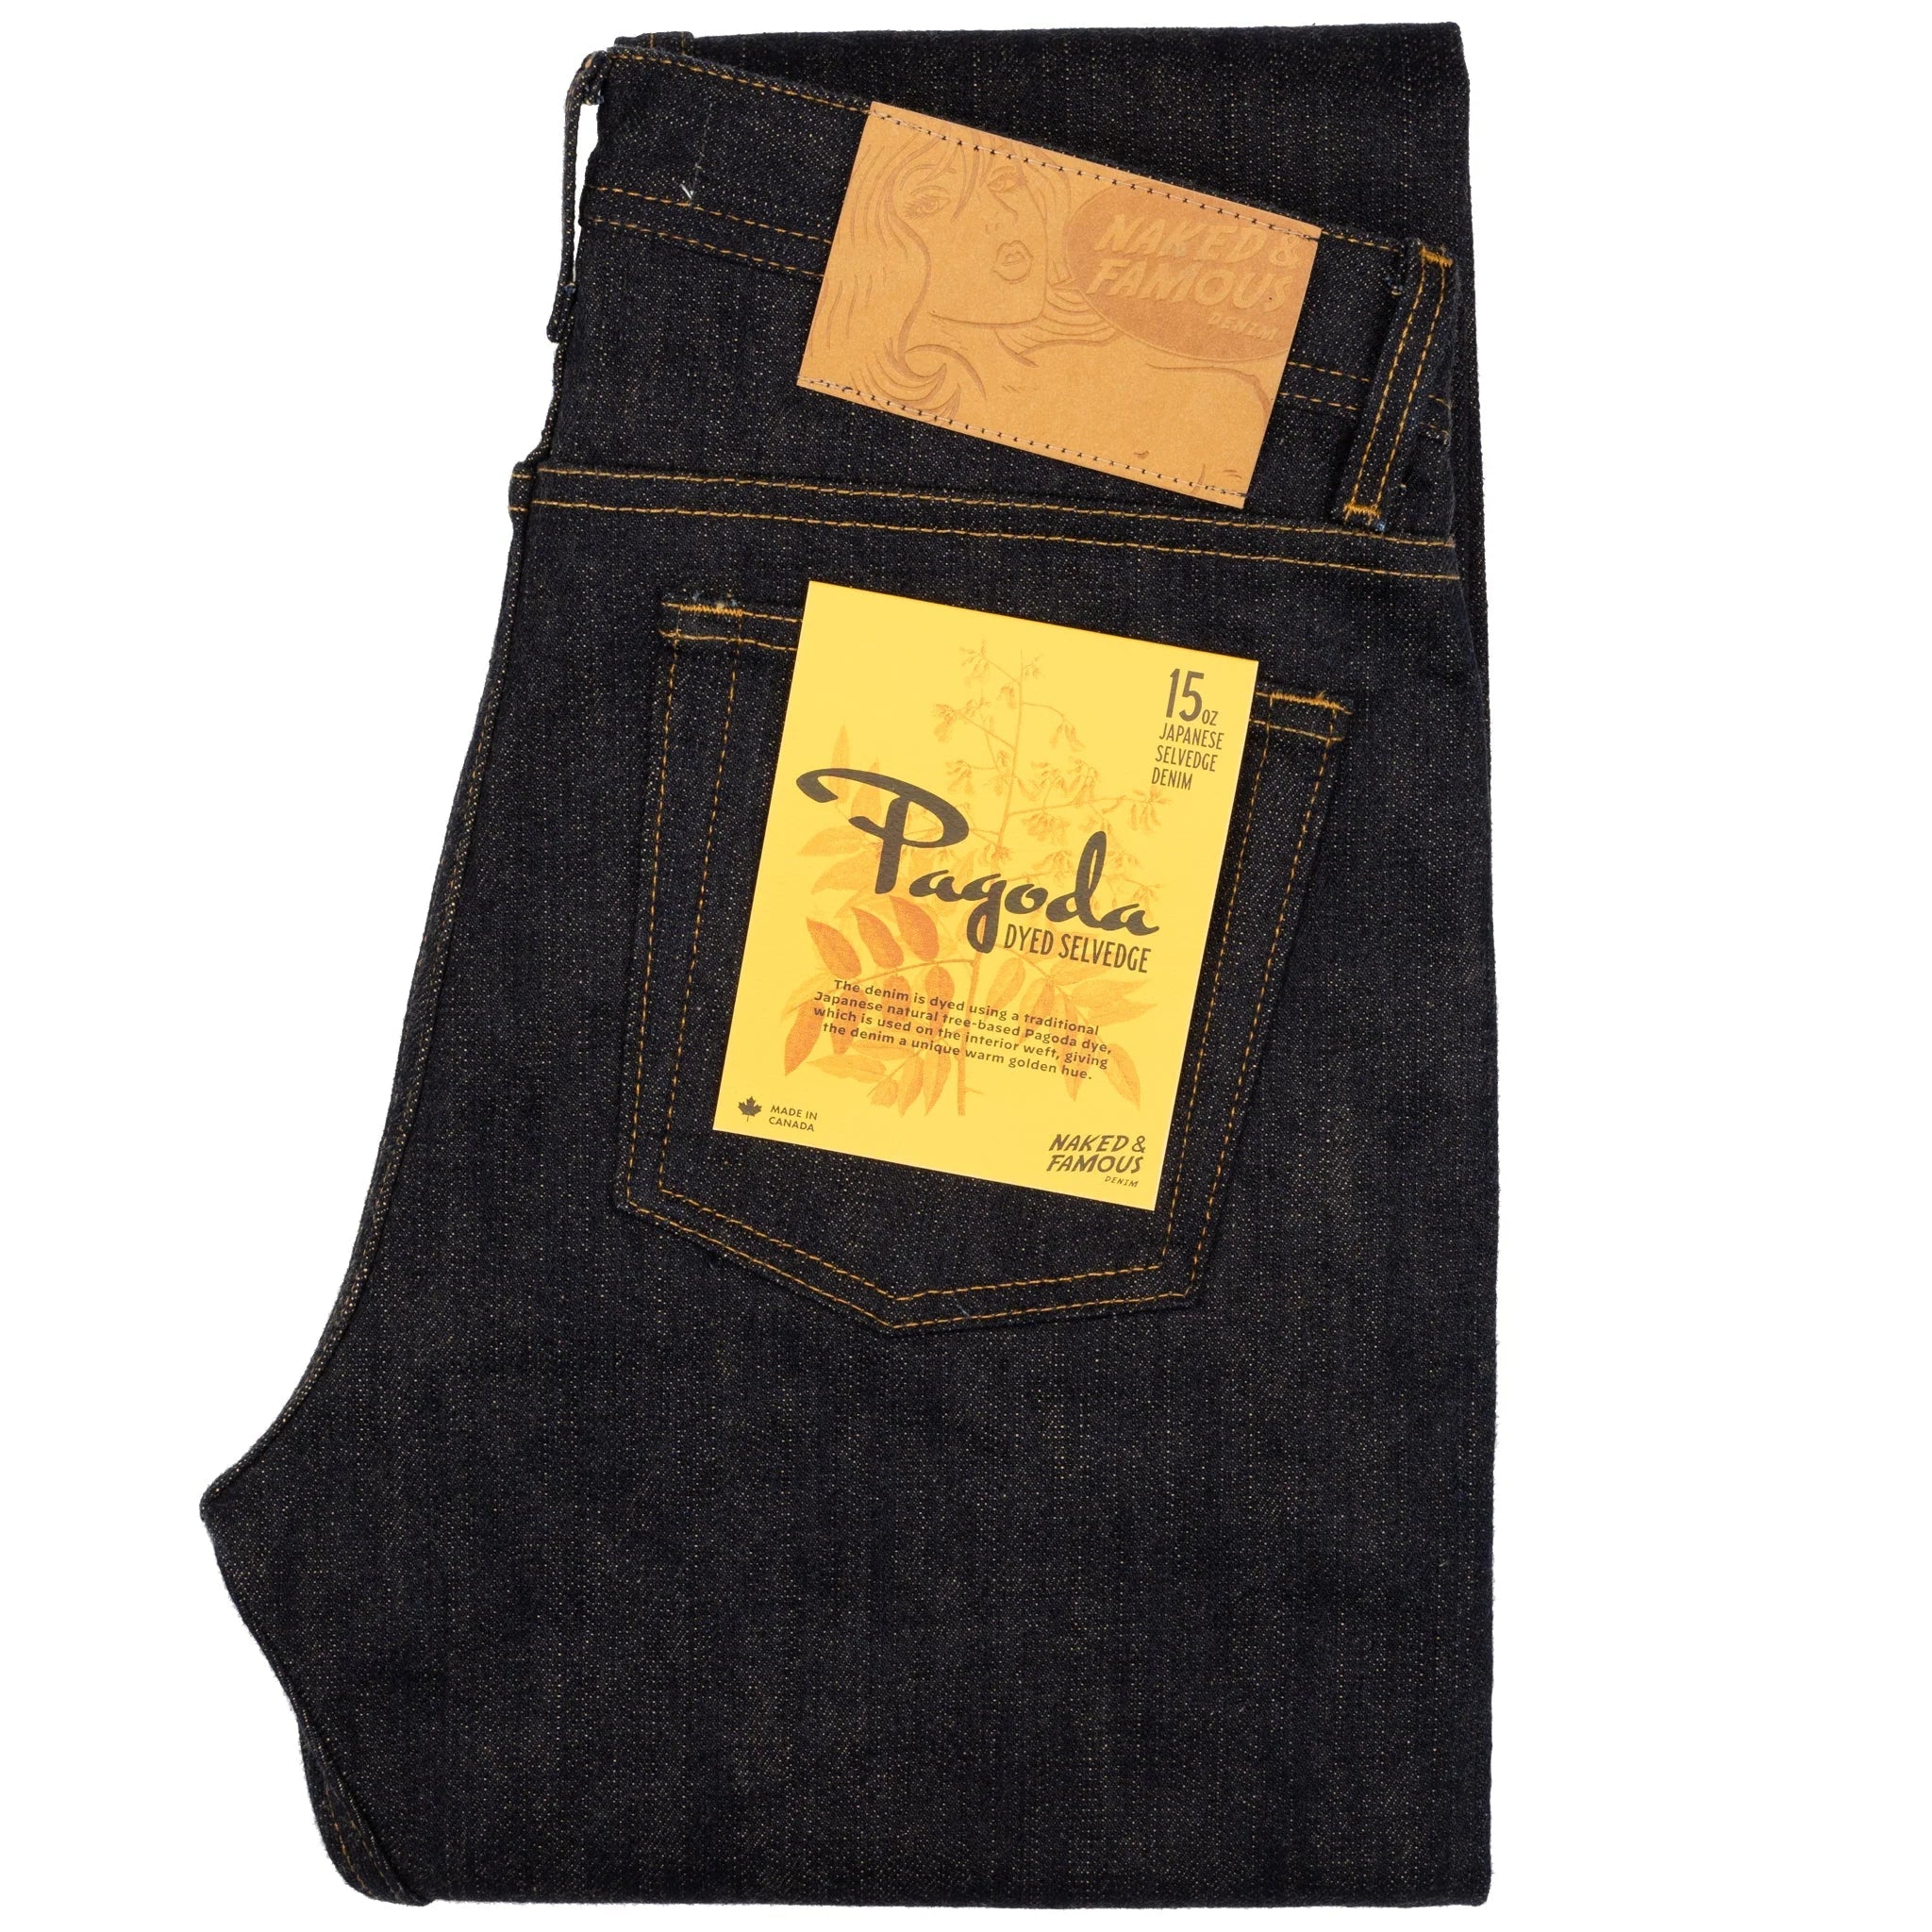 Naked &amp; Famous - Weired Guy - Pagoda 15 oz - Vintage Jeans